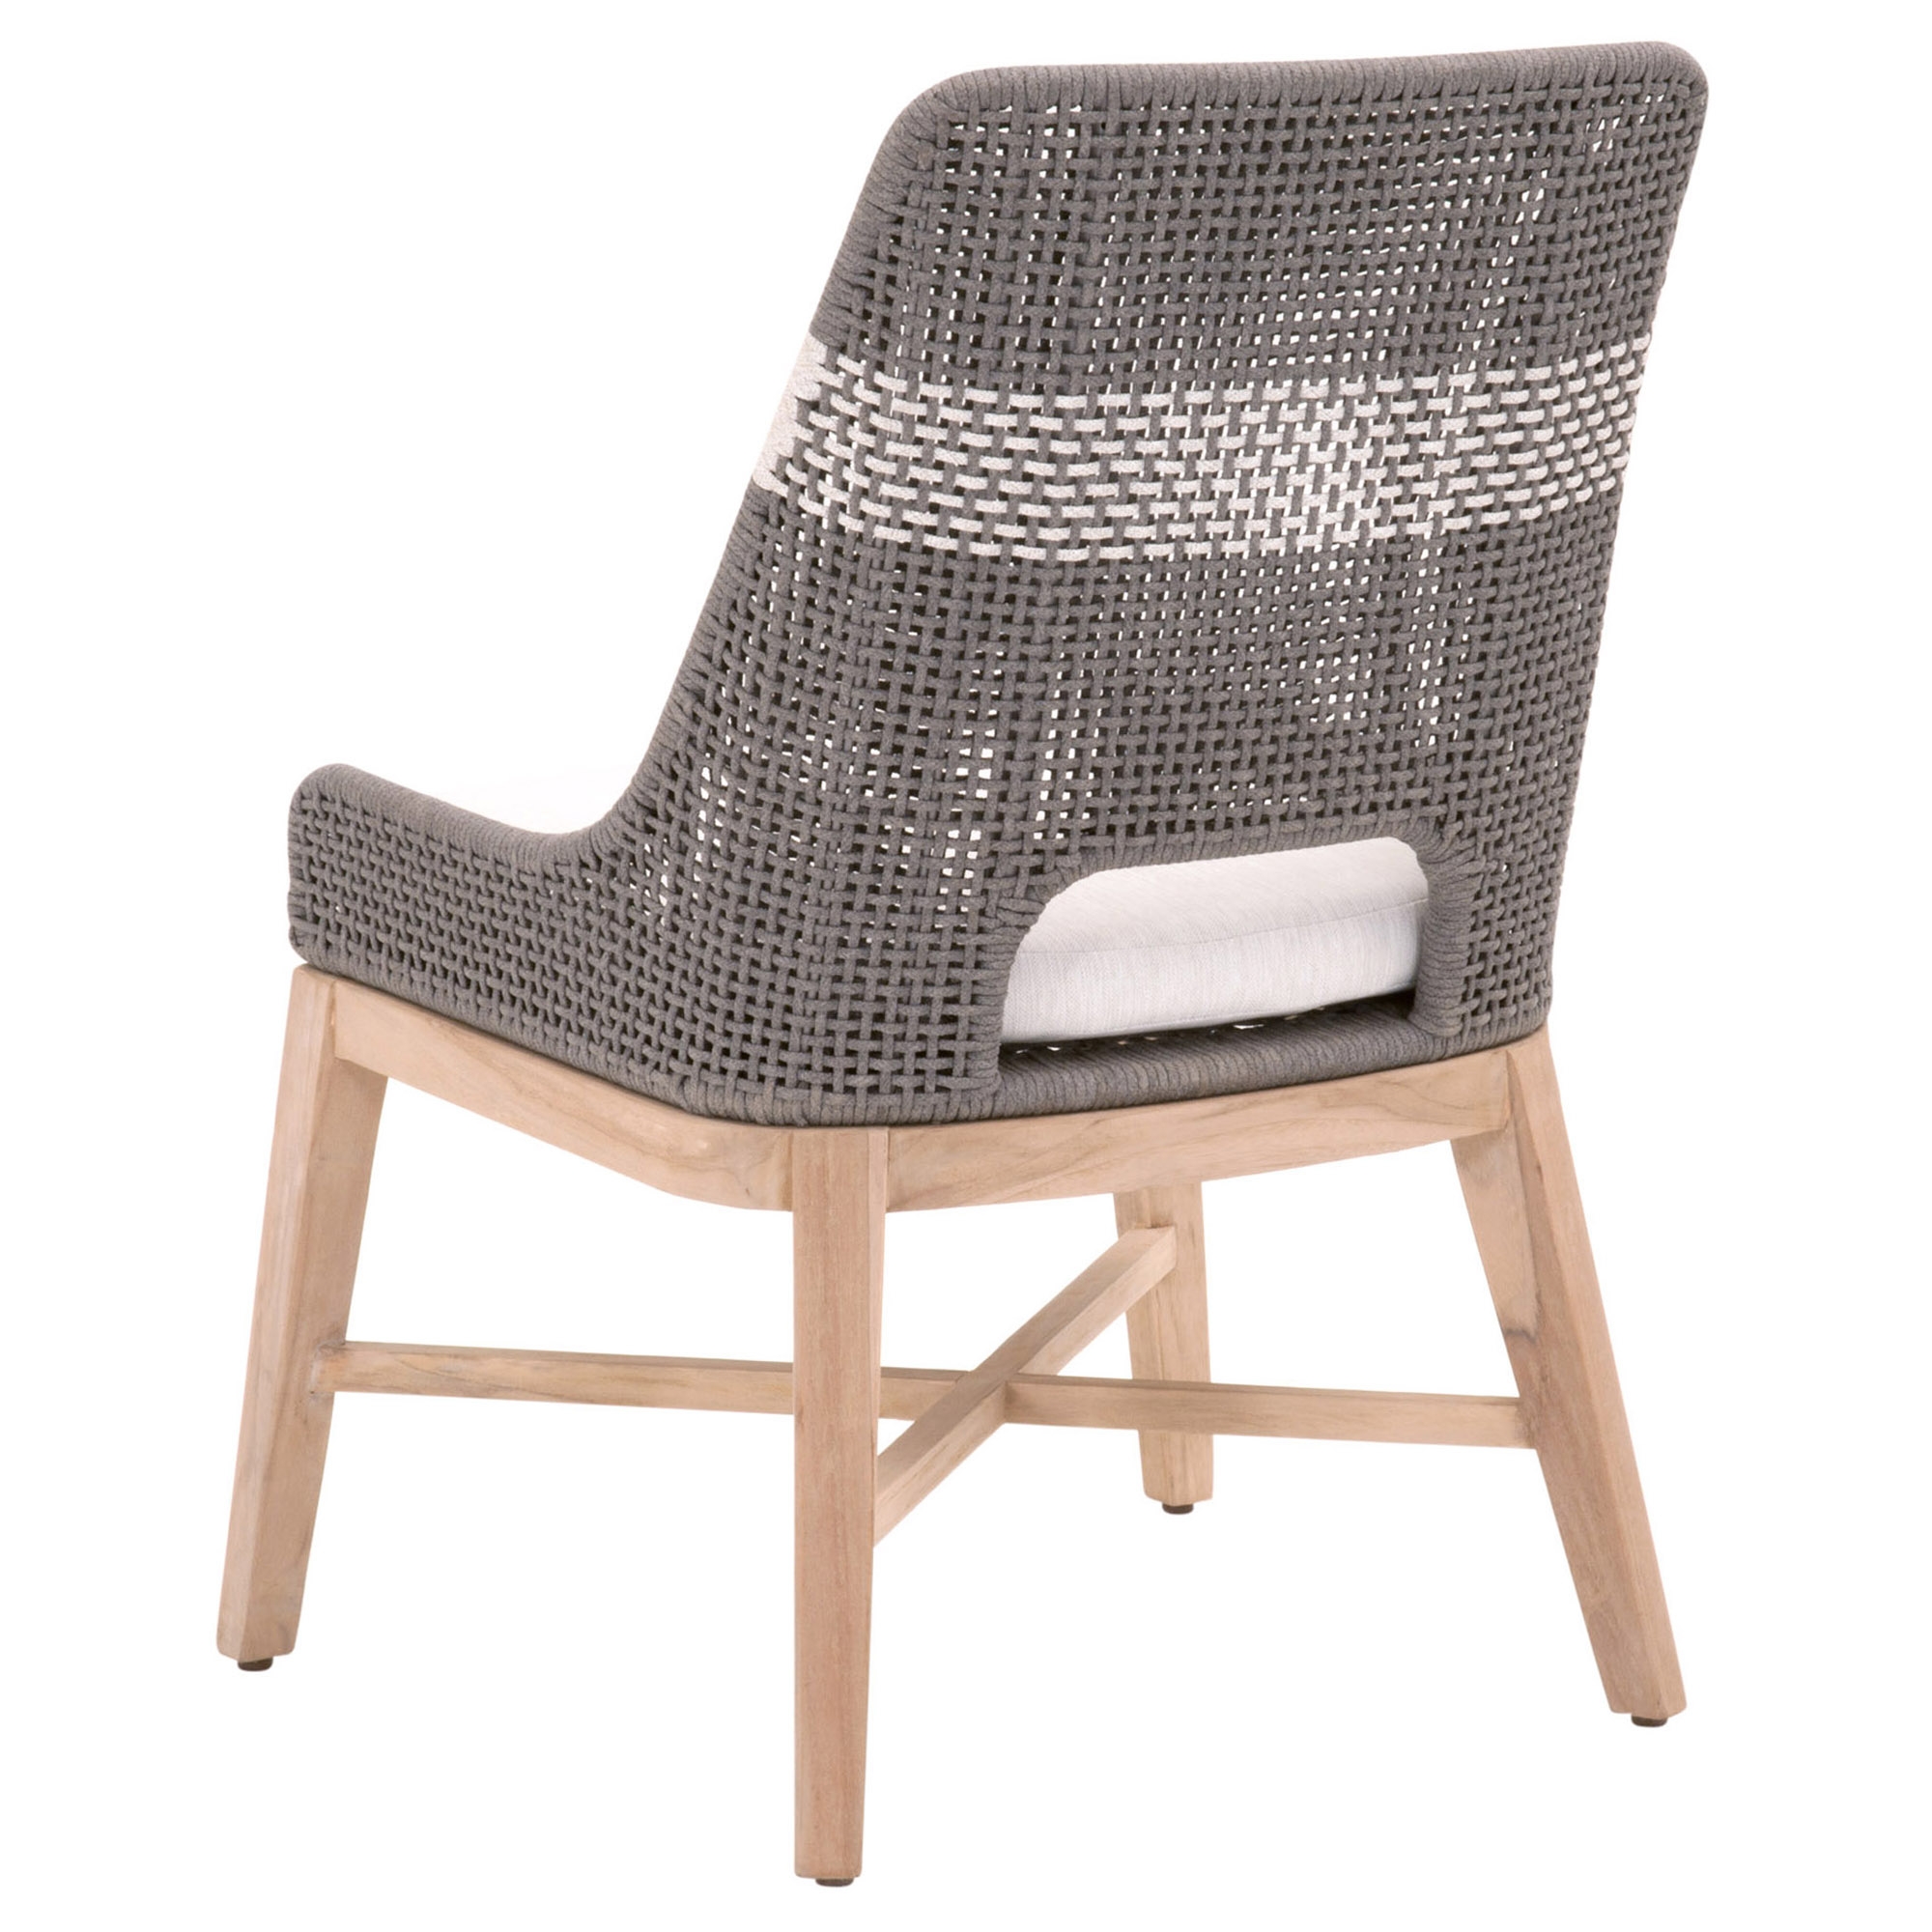 Tapestry Outdoor Dining Chair, Dark Gray, Set of 2 - Image 5